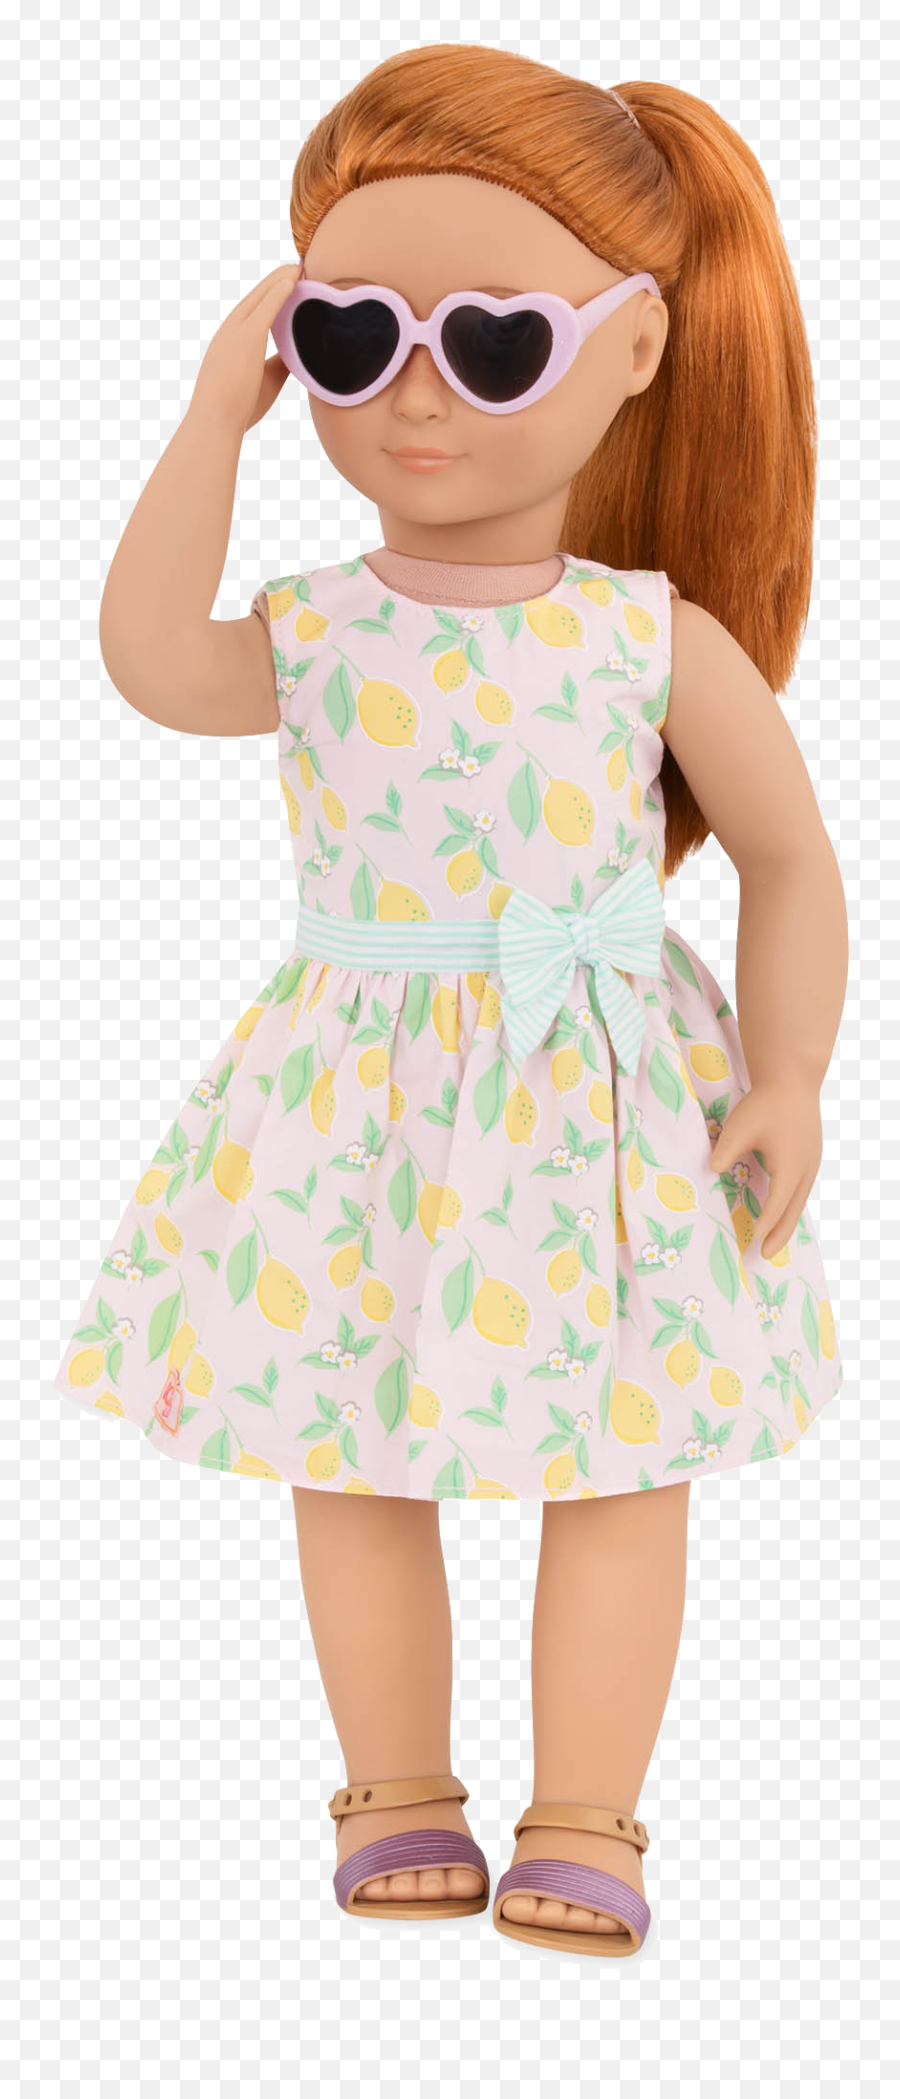 Our Generation Deluxe Outfit Croquet Play Clothing U0026 Shoes - Basic Dress Emoji,American Girl Doll Emojis